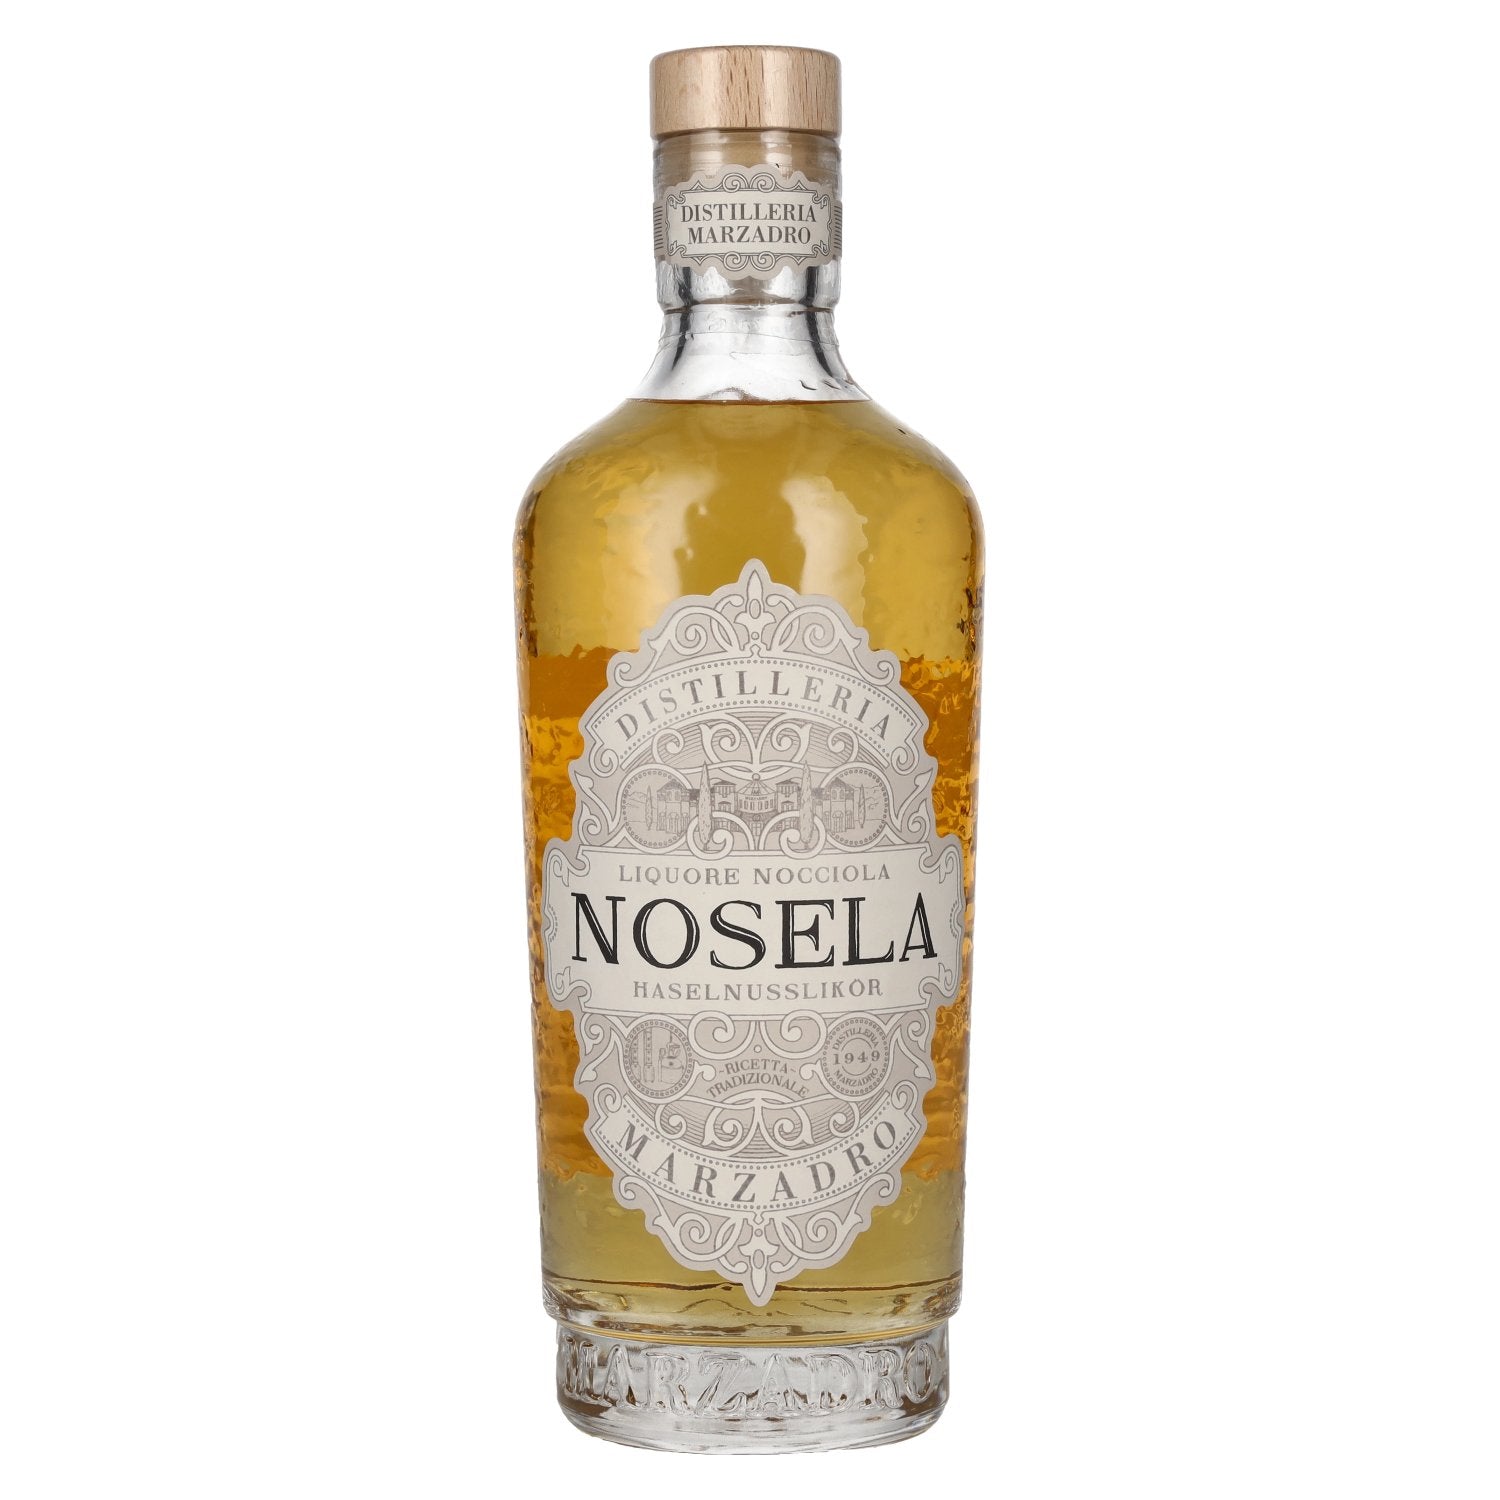 Marzadro Nosela Haselnuss Likoer 25% Vol. 0,7l